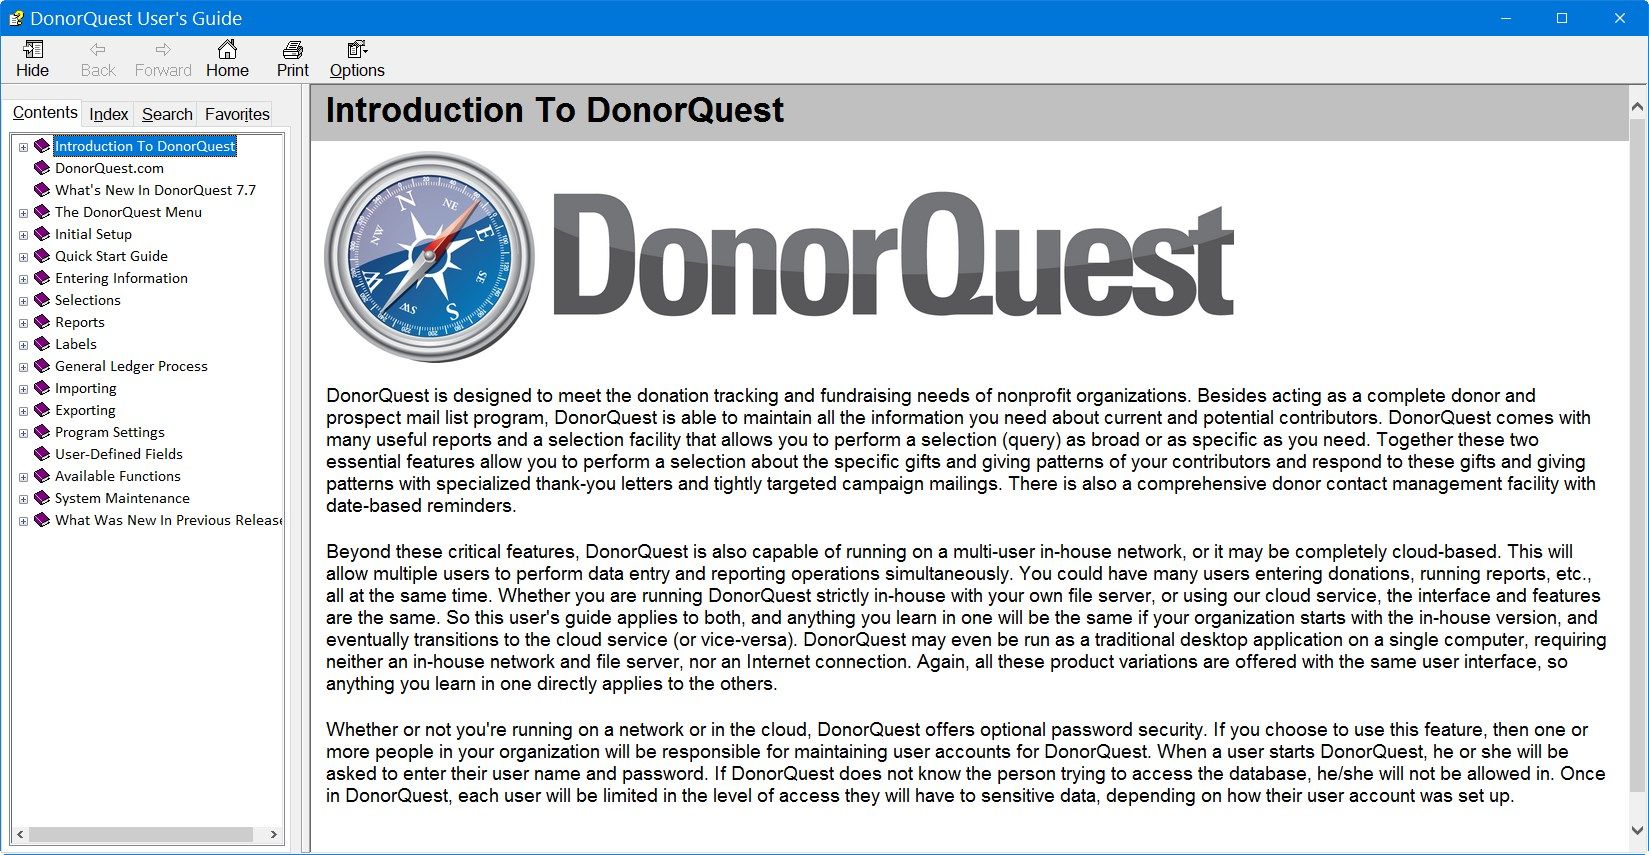 DonorQuest includes a very detailed and fully illustrated User Guide.